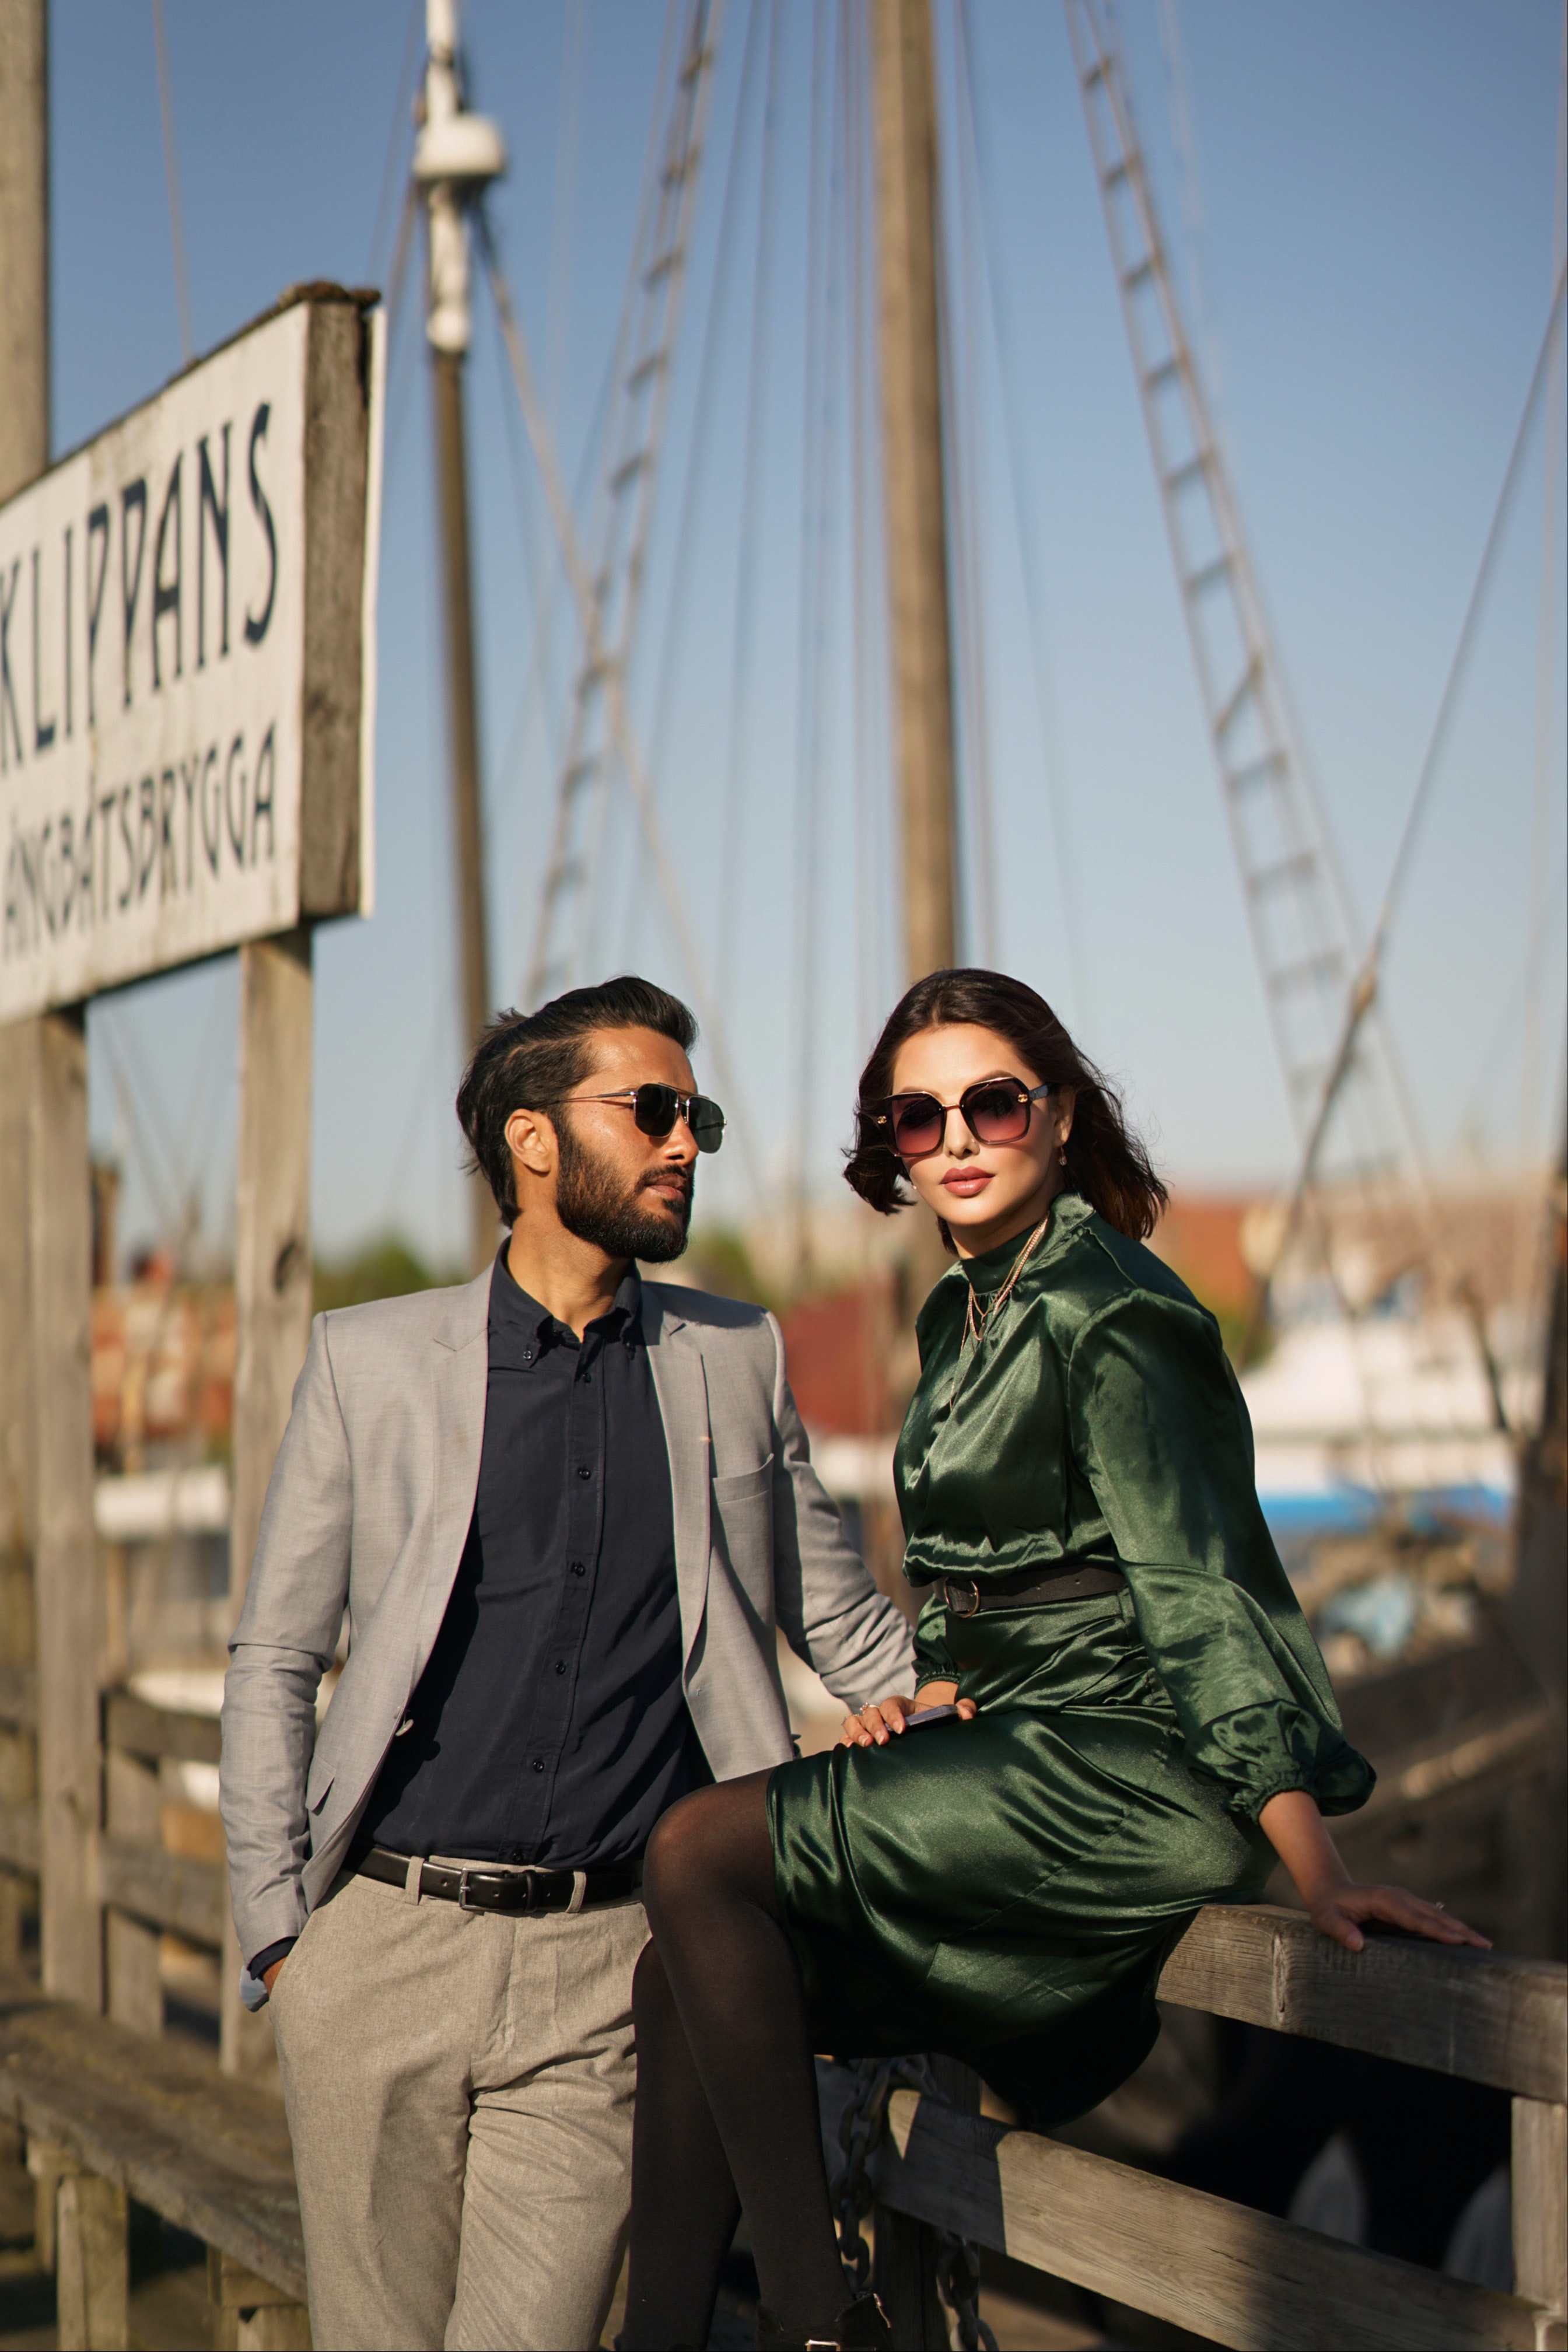 A couple poses in their stylish clothes. | Source: Pexels